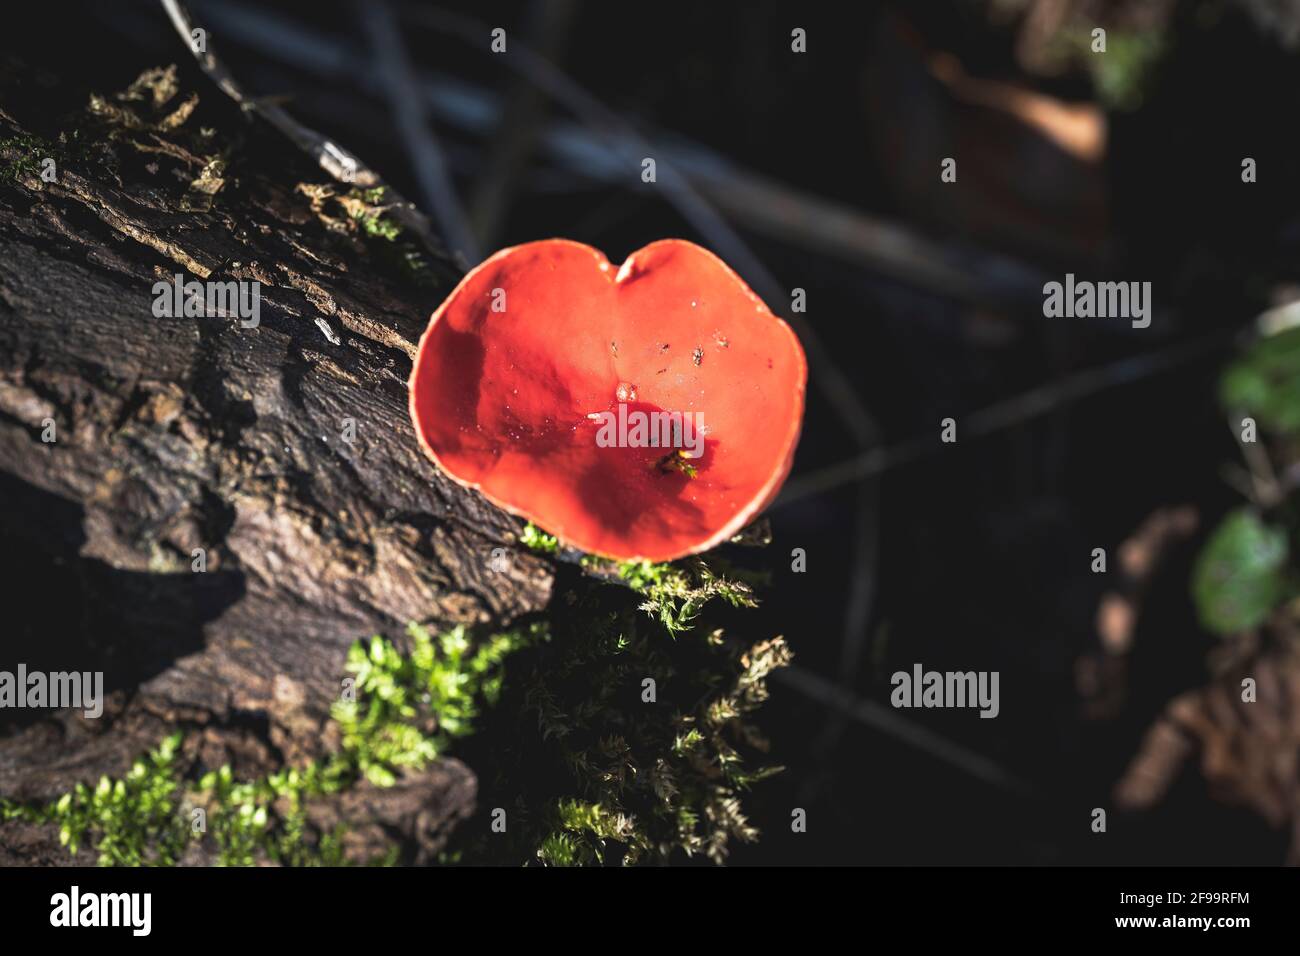 Scarlet cup cup, Sarcoscypha coccinea, mushroom, forest, nature, Swabian Alb, Baden-Wuerttemberg, Germany, Europe Stock Photo